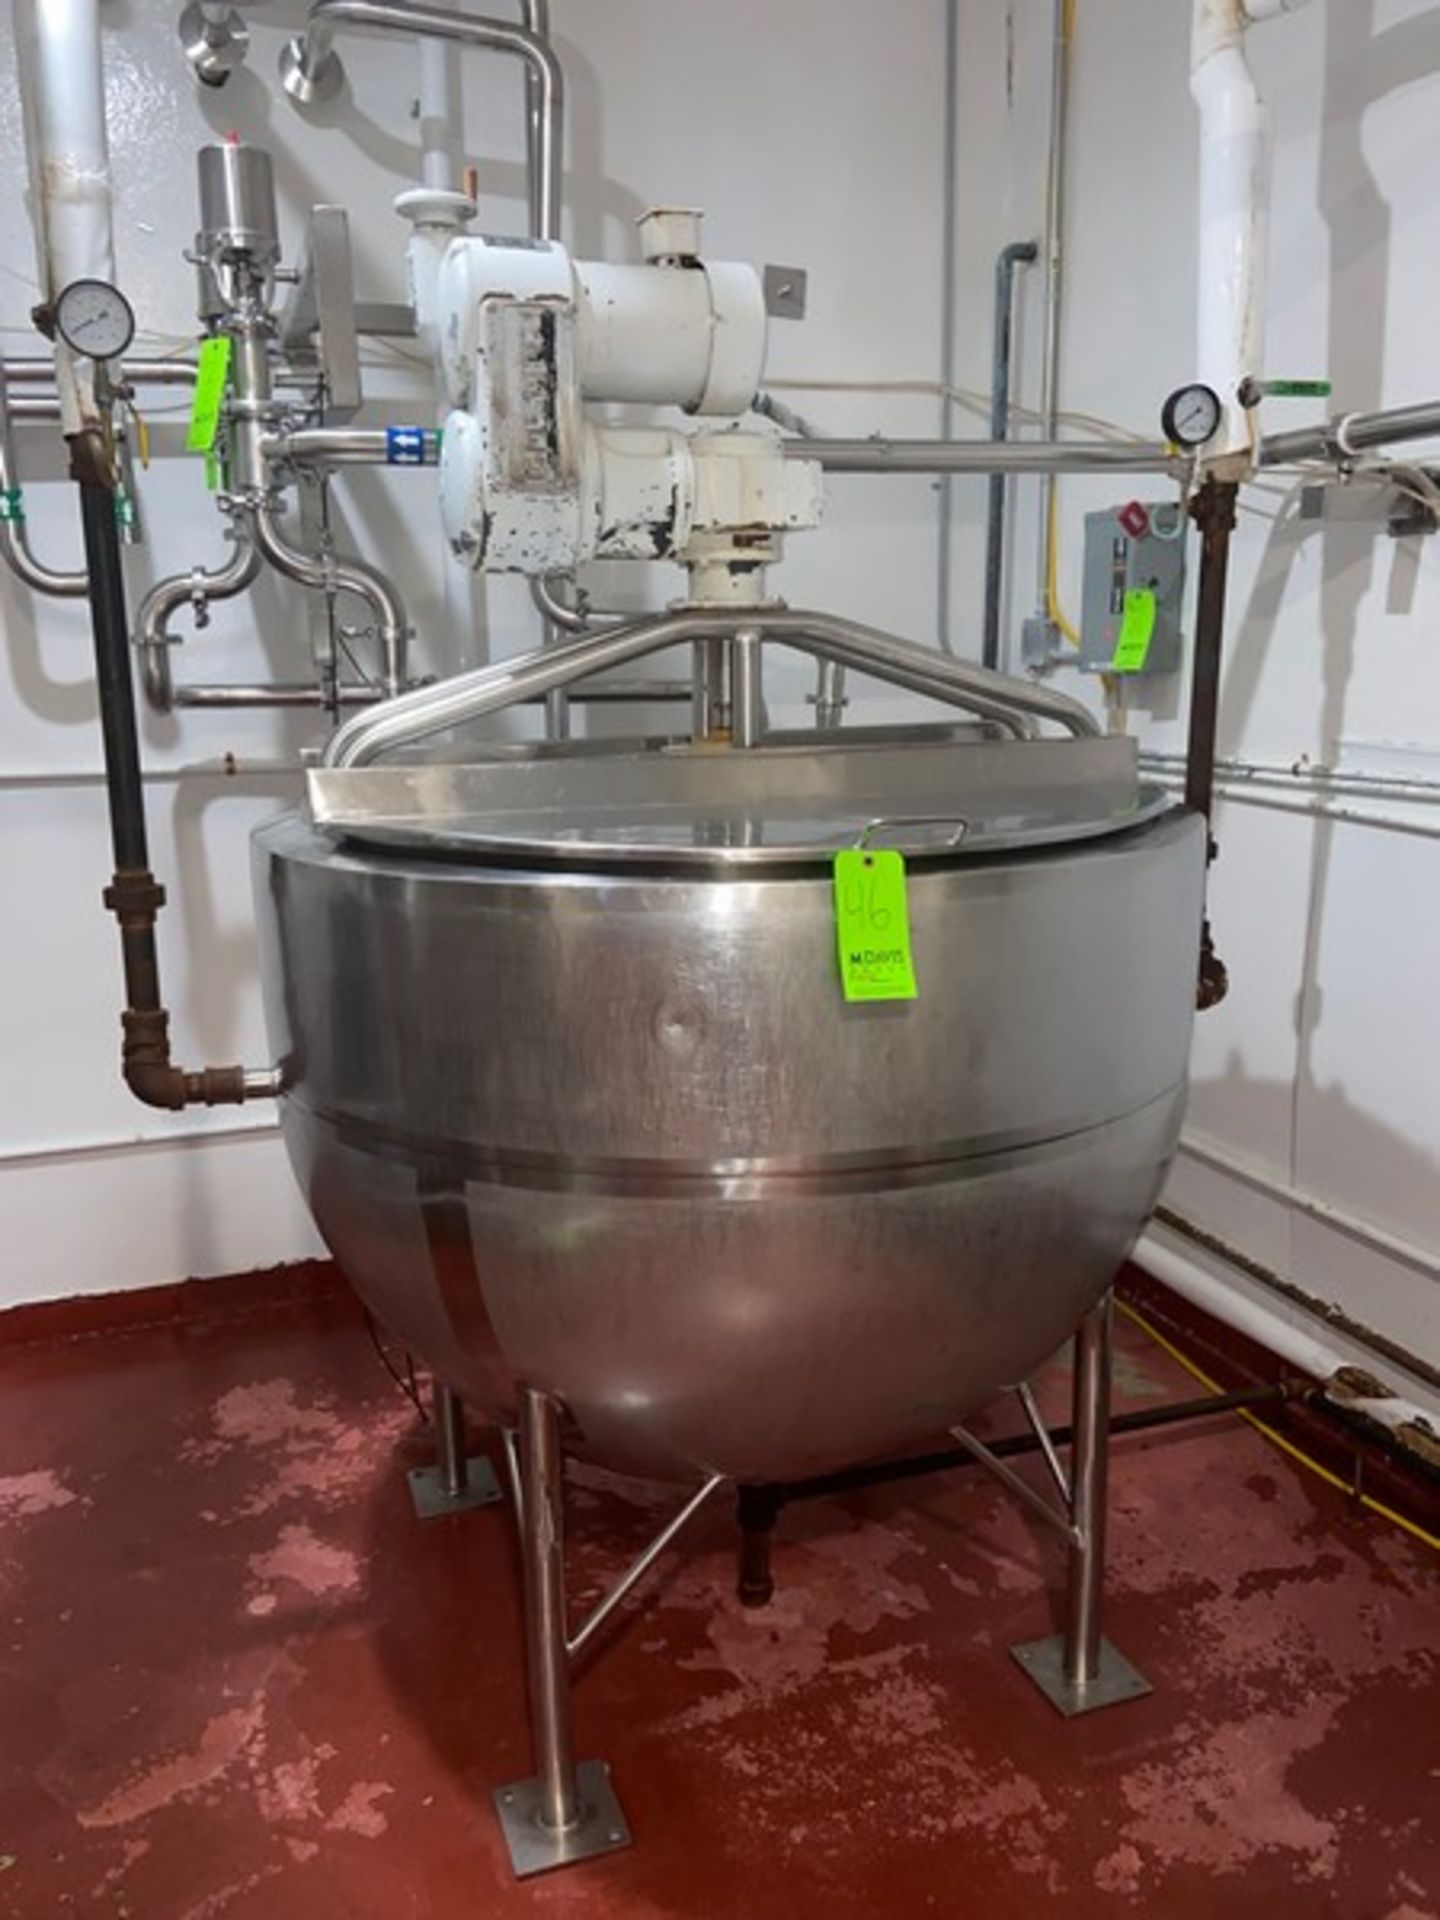 Aprox. 200 Gal. S/S Kettle, with (2) S/S Hinge Ligs, with Top Mounted Reeves Motor, Mounted on S/S